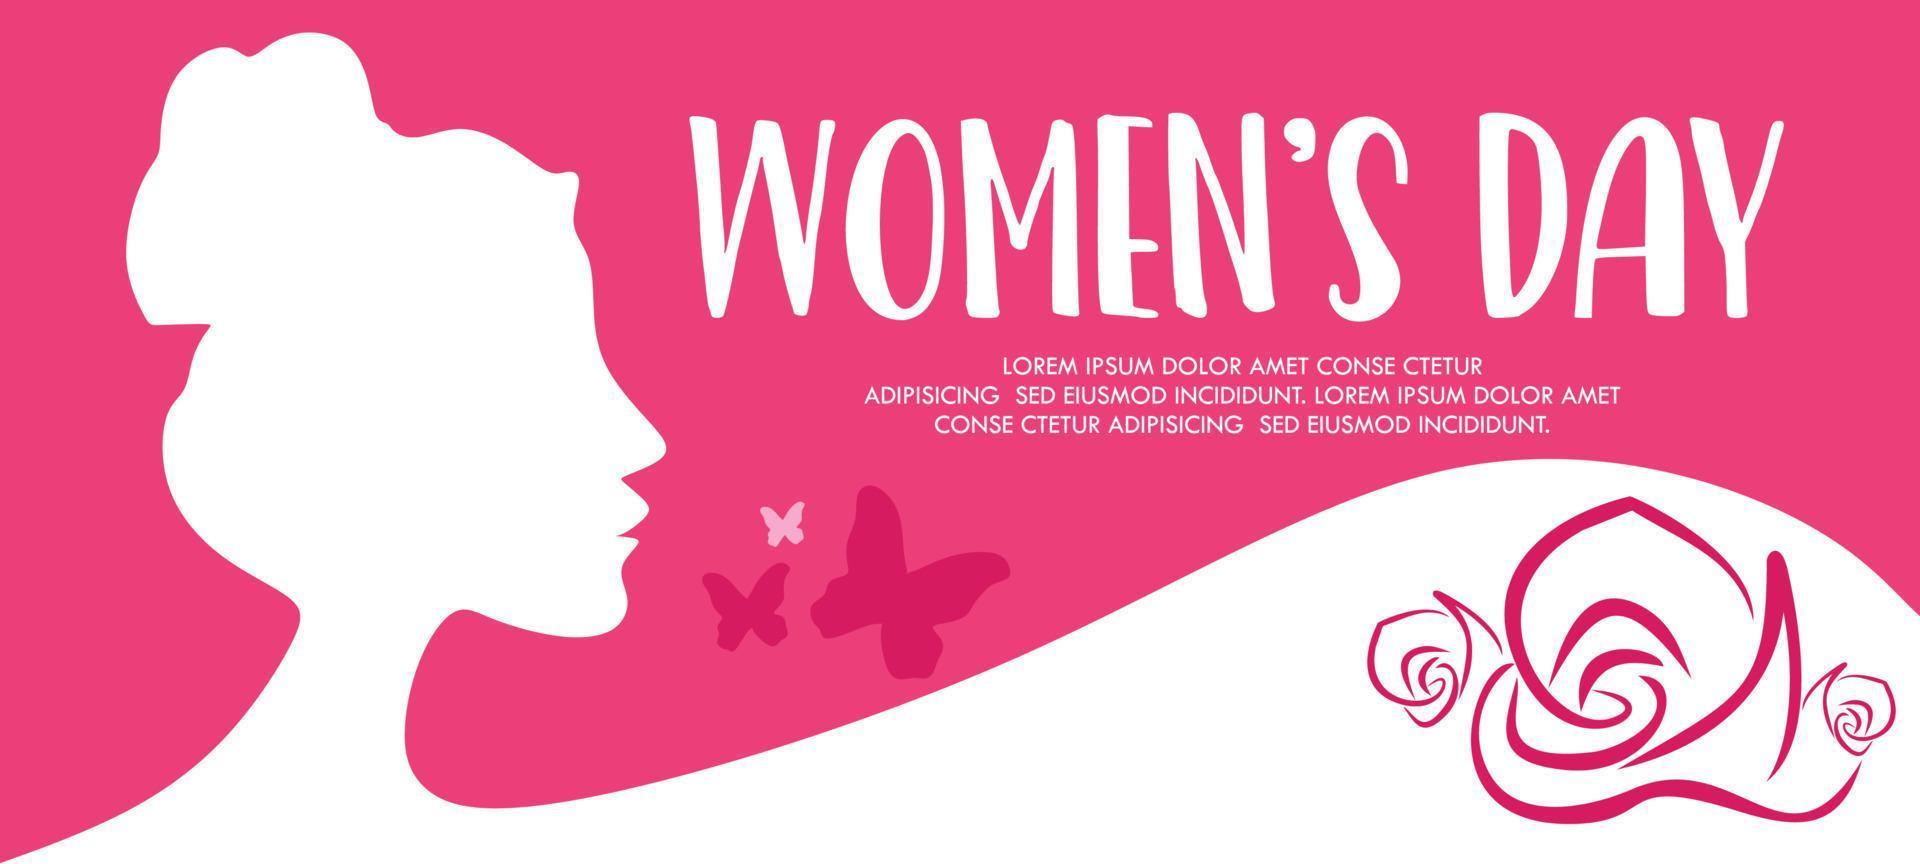 happy women's day 8 march banner design pink and white color in vector